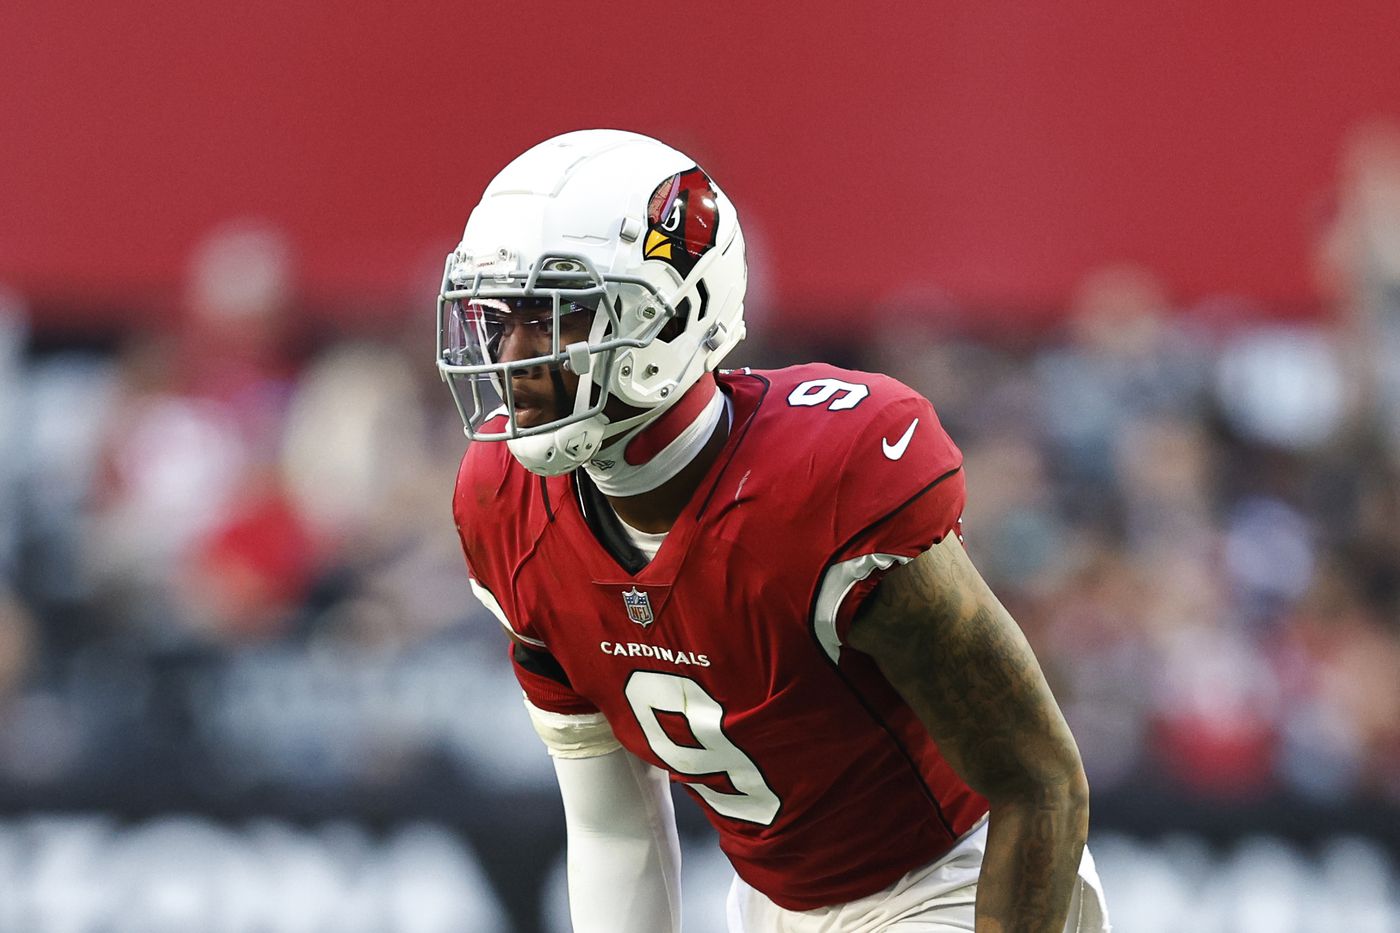 Arizona Cardinals to decline Isaiah Simmons' fifth year option, per report - Revenge of the Birds